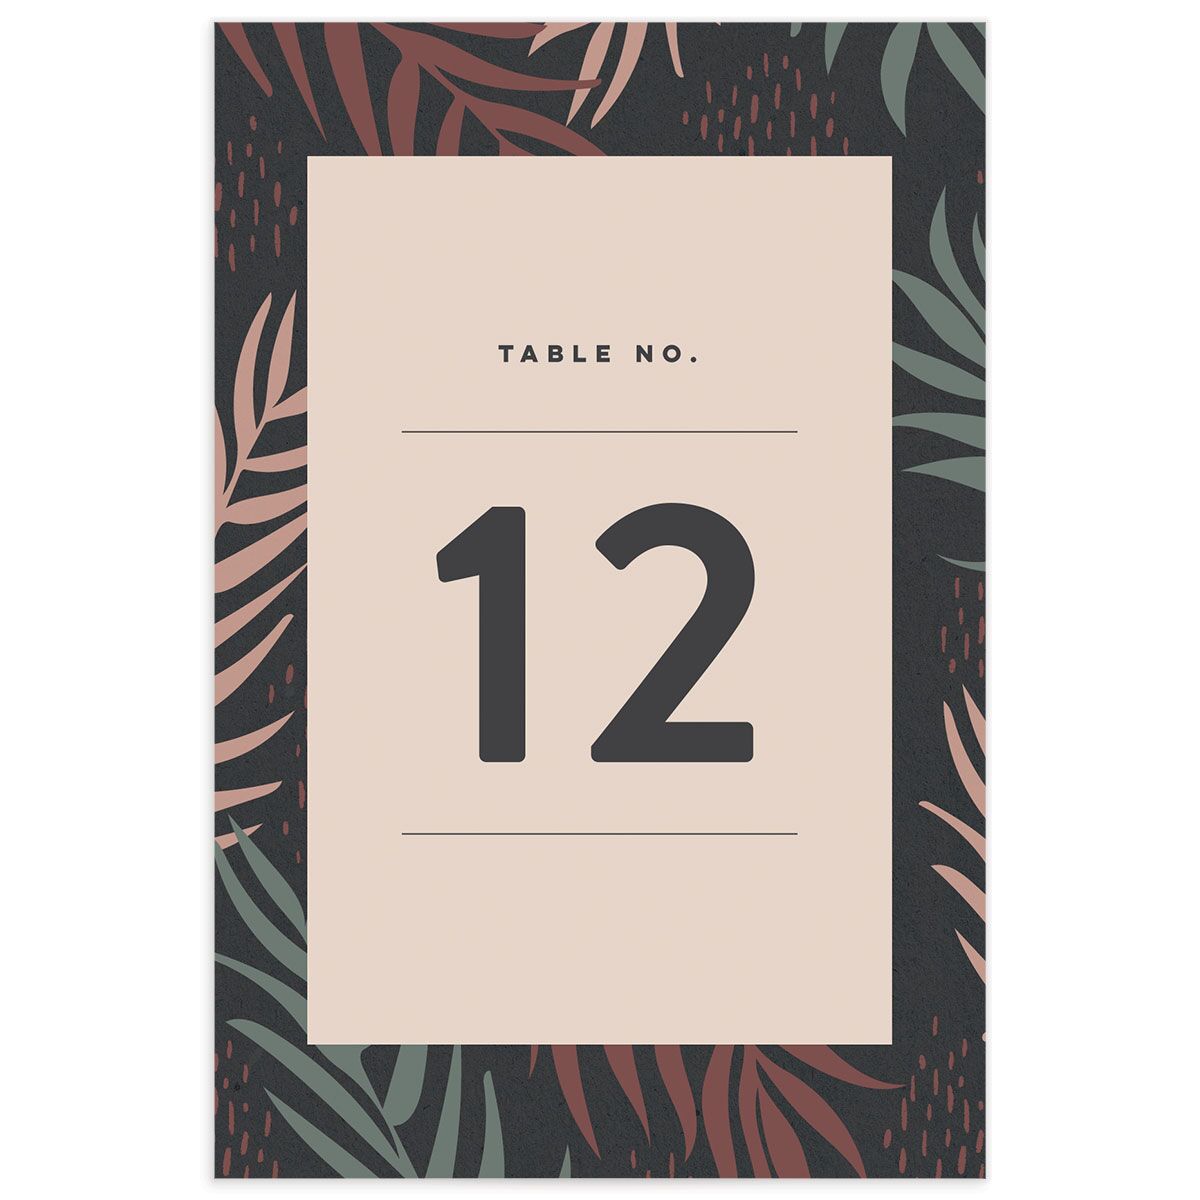 A Wedding Table Number from the Modern Palm Collection